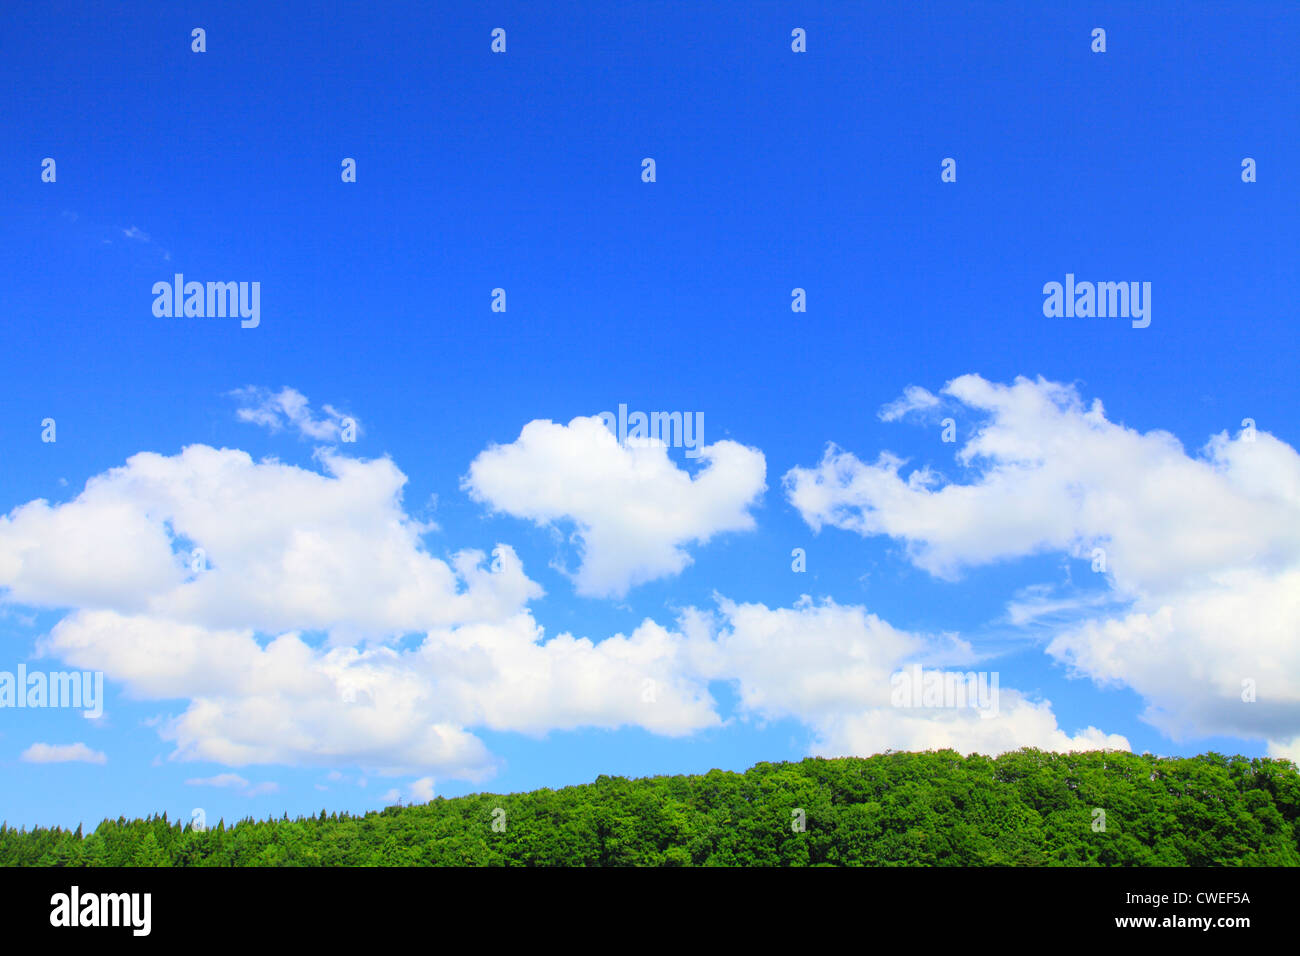 Lush Trees And Blue Sky With Clouds In Background Stock Photo